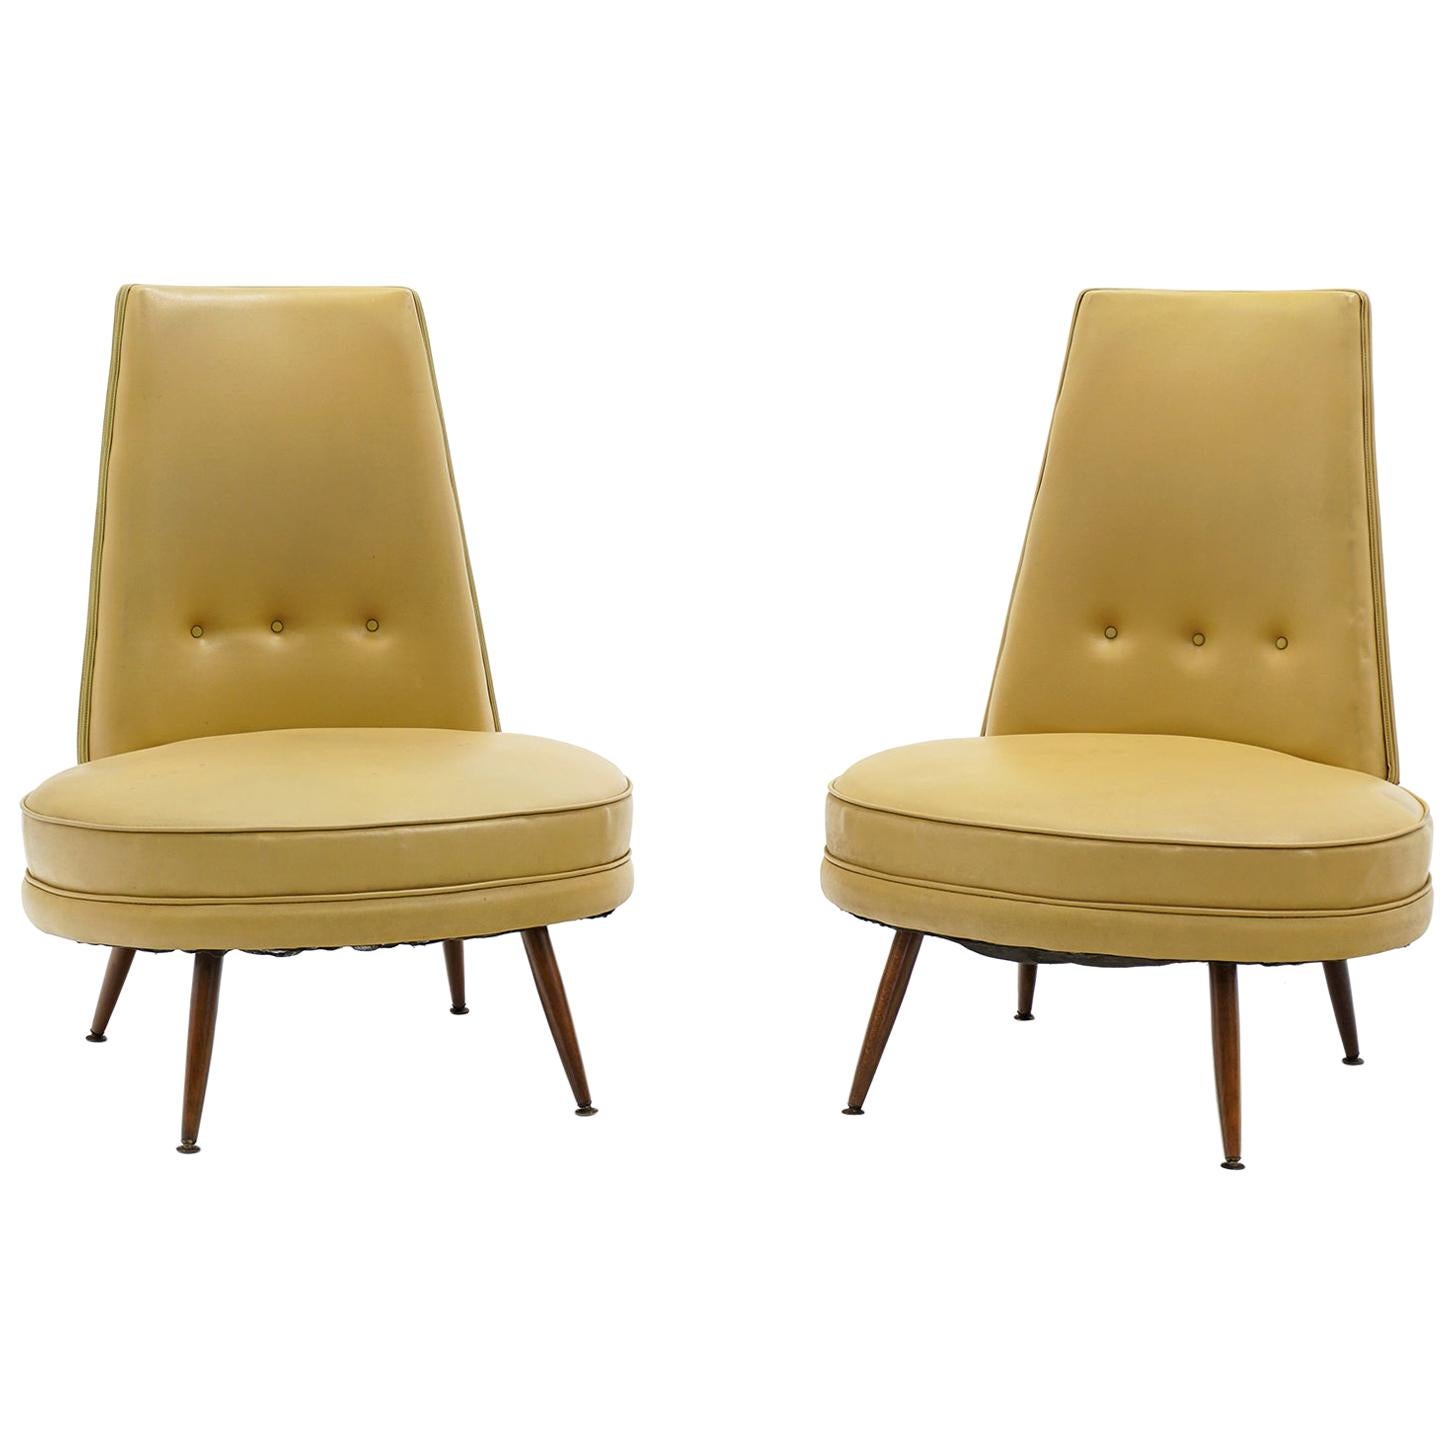 Pair of Slipper Chairs, High Back with Wide Round Seat, Armless